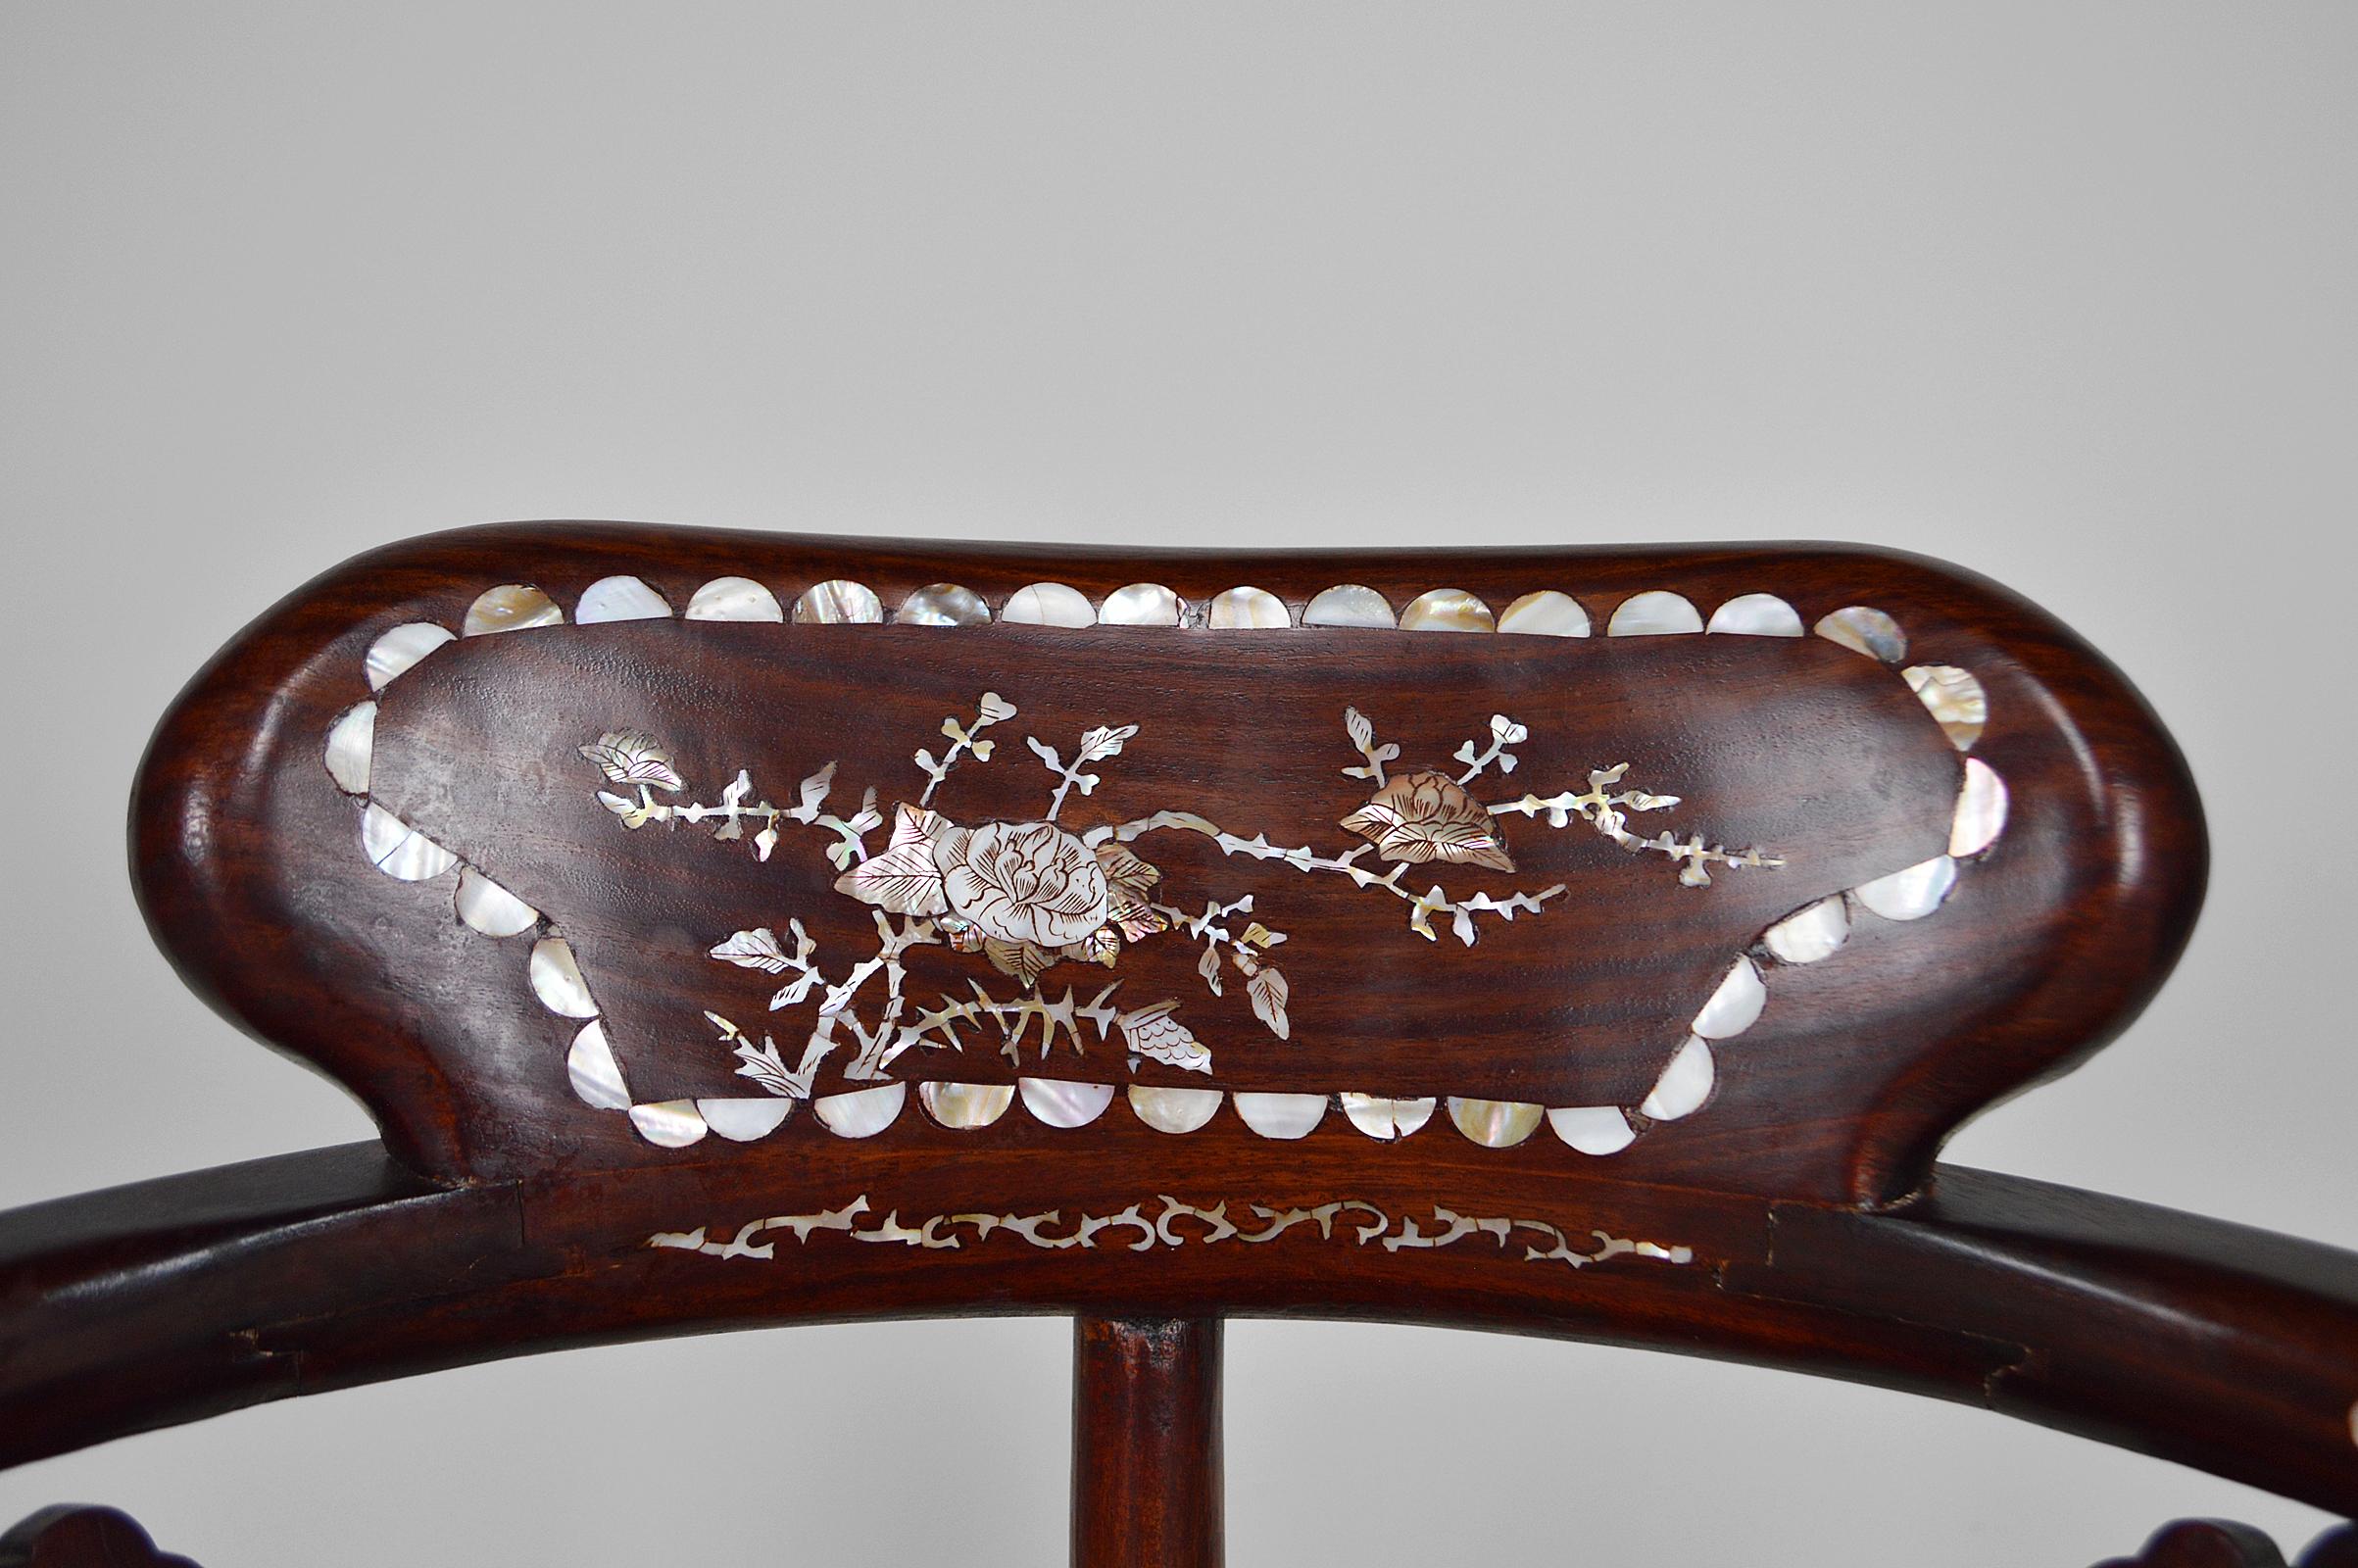 Set of 4 Asian Armchairs in Carved and Inlaid Wood, circa 1900-1920 For Sale 4